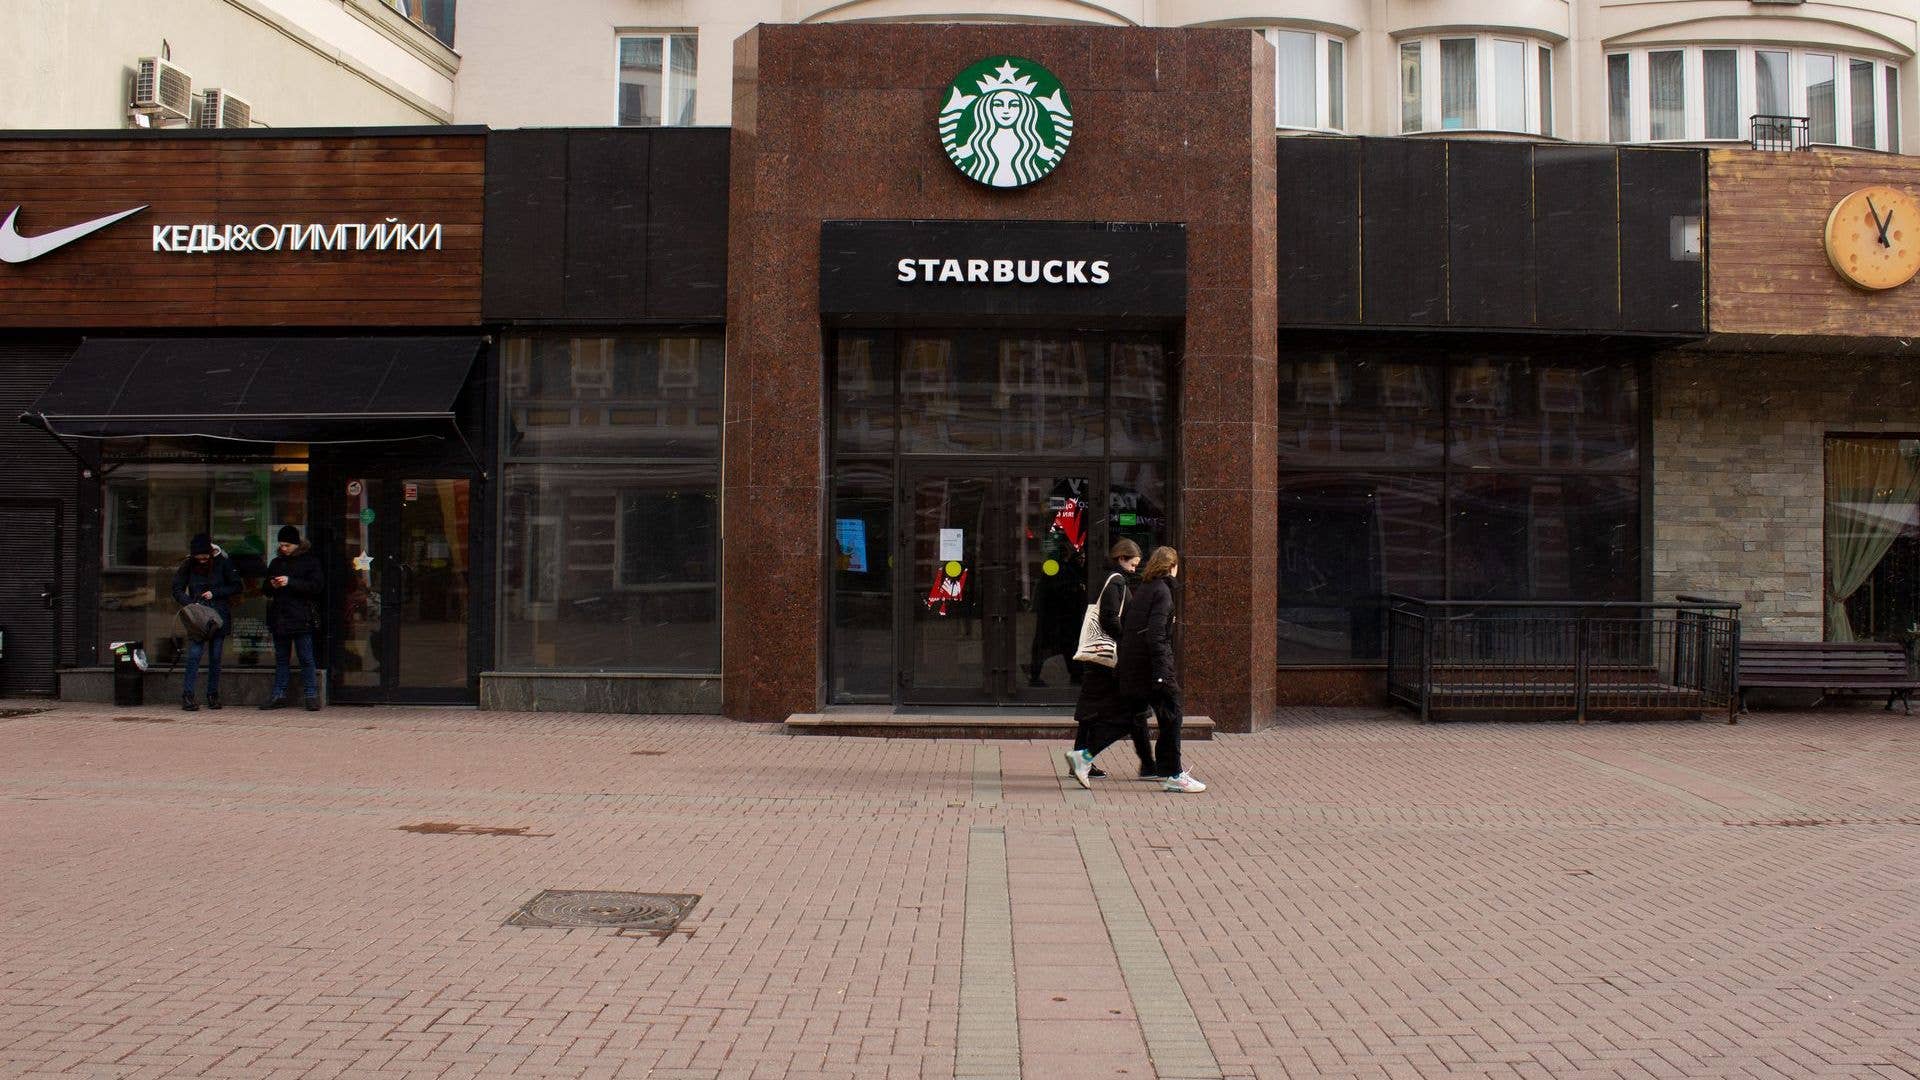 View of a Starbucks location in Russia